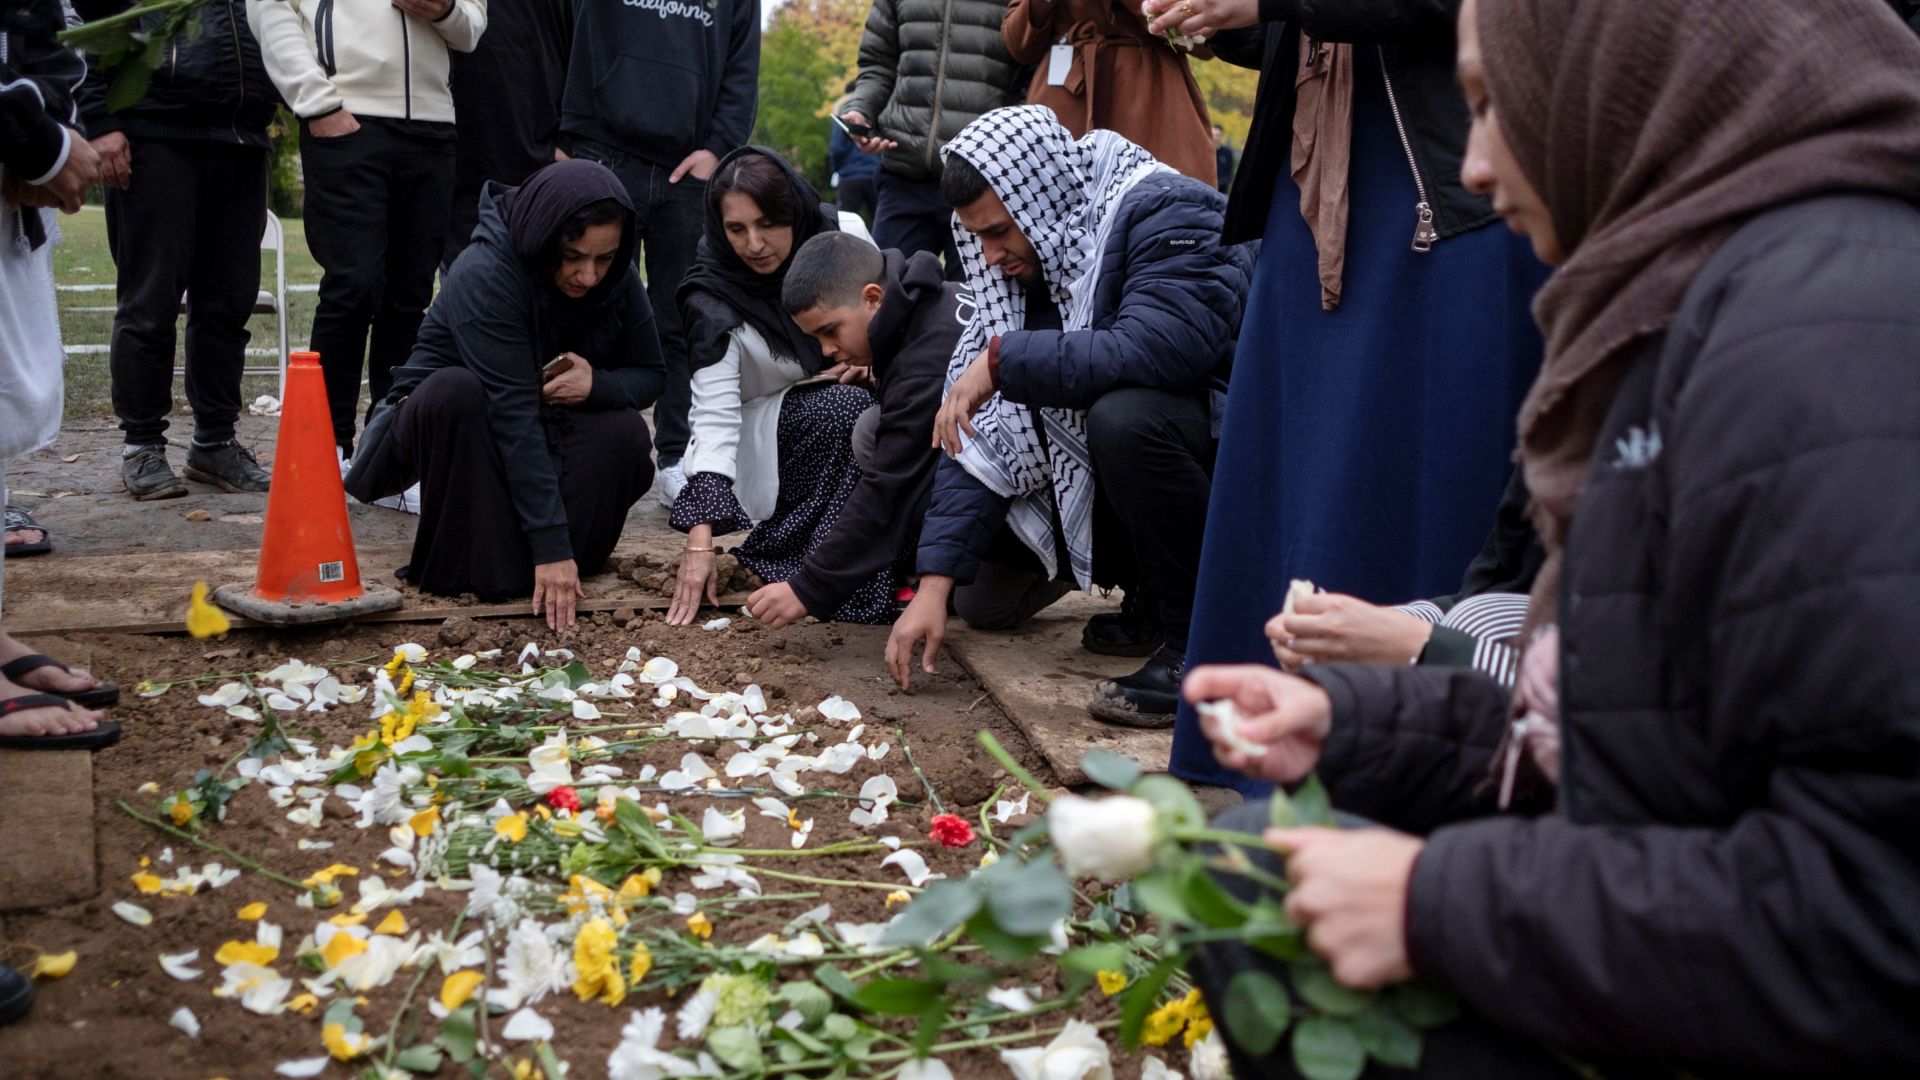 Mourners place flowers at the grave of Wadea Al-Fayoume, a six-year-old Palestinian American child, who was killed in a Chicago suburb